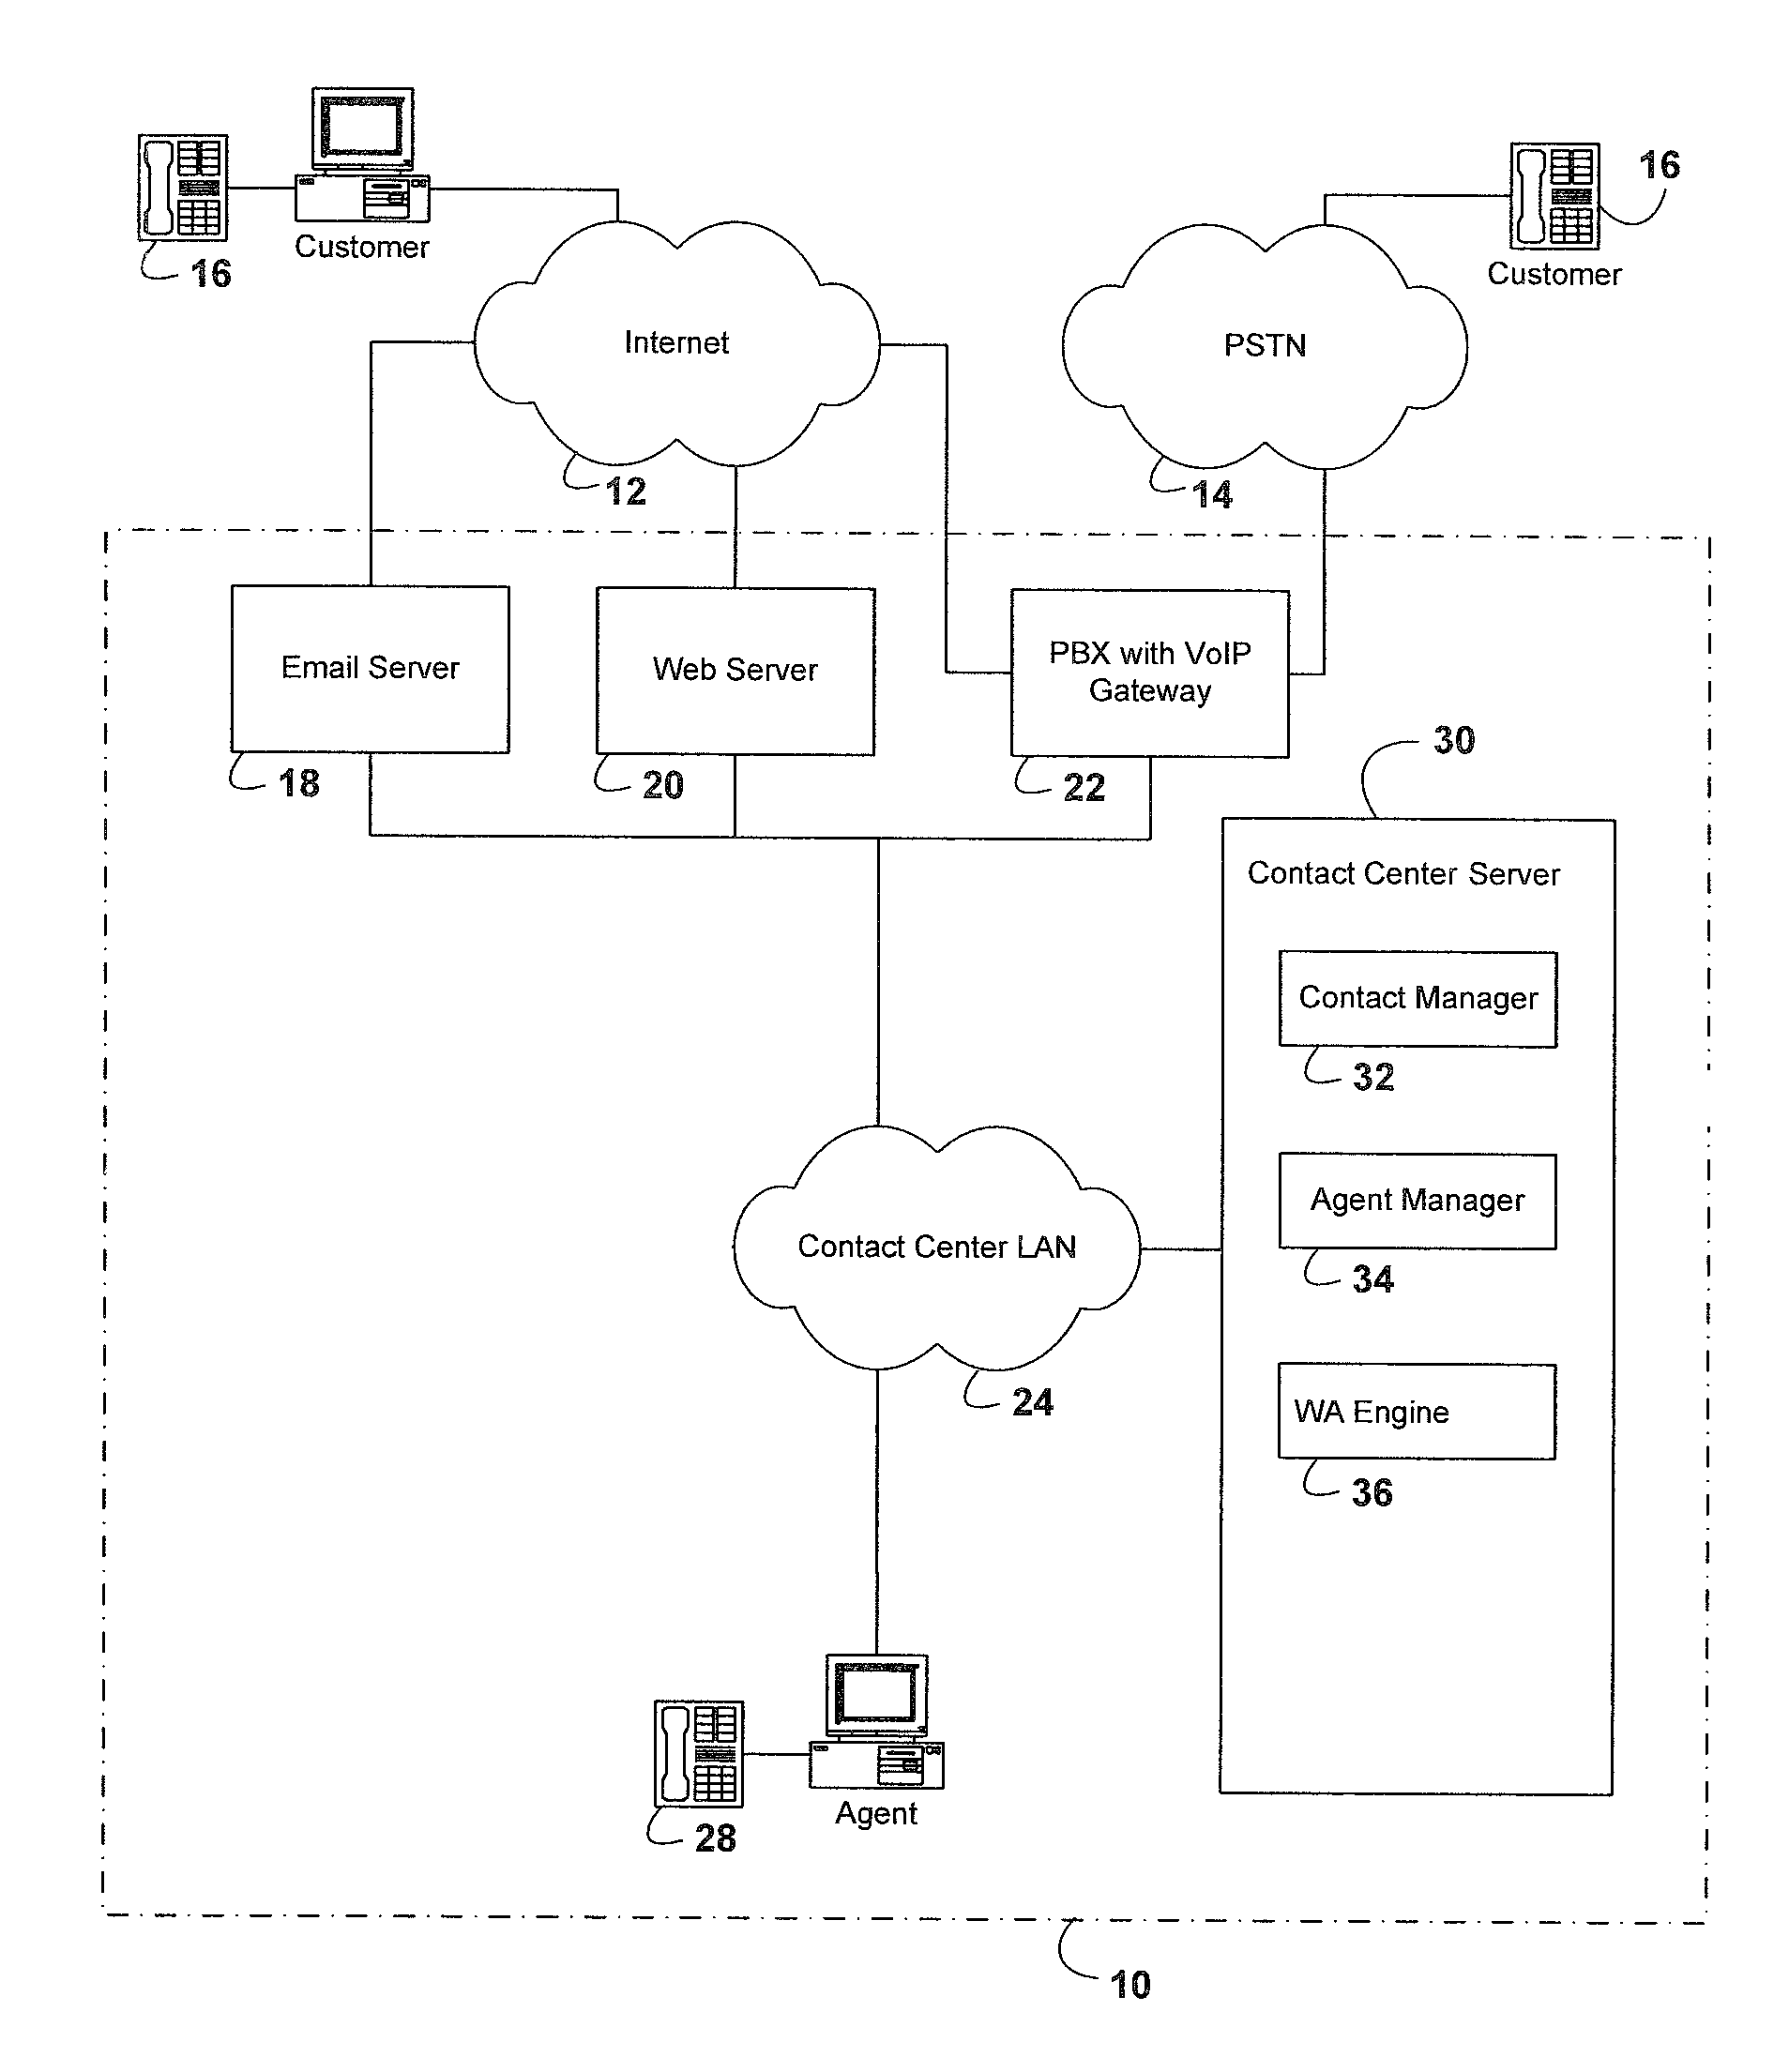 Method and system for managing contacts in a contact center